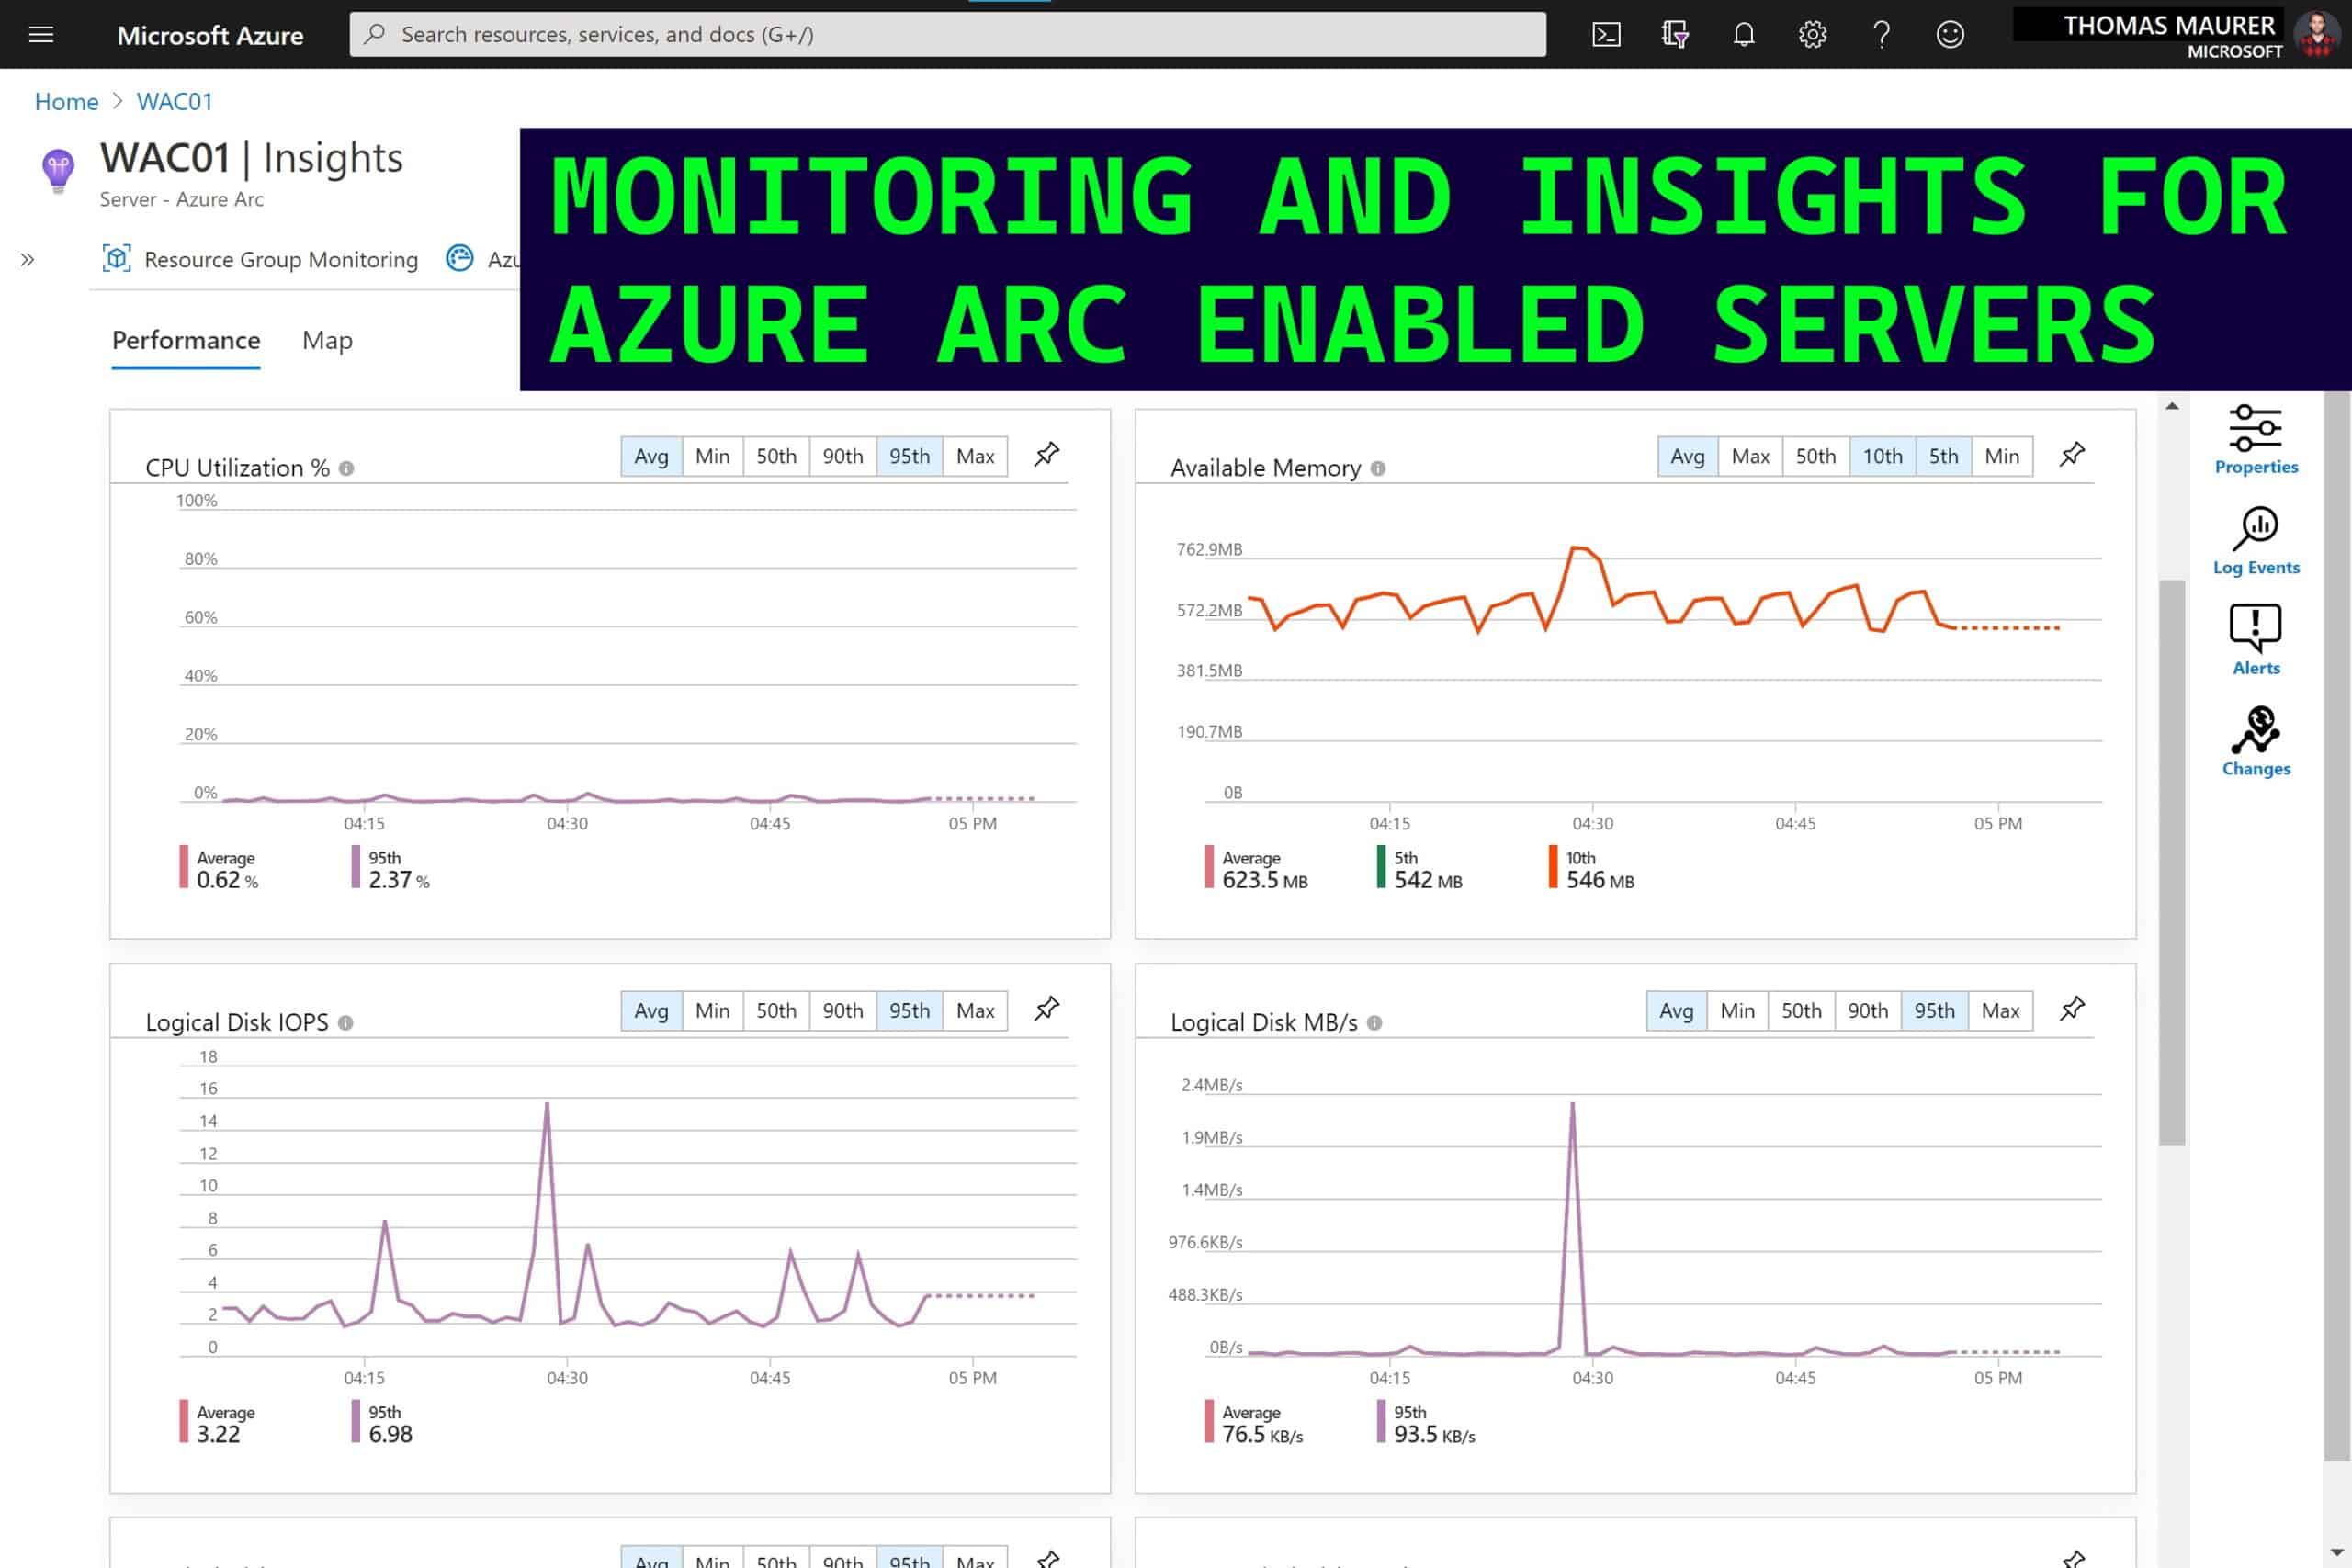 Monitoring and Insights for Azure Arc enabled Servers and Azure Monitor